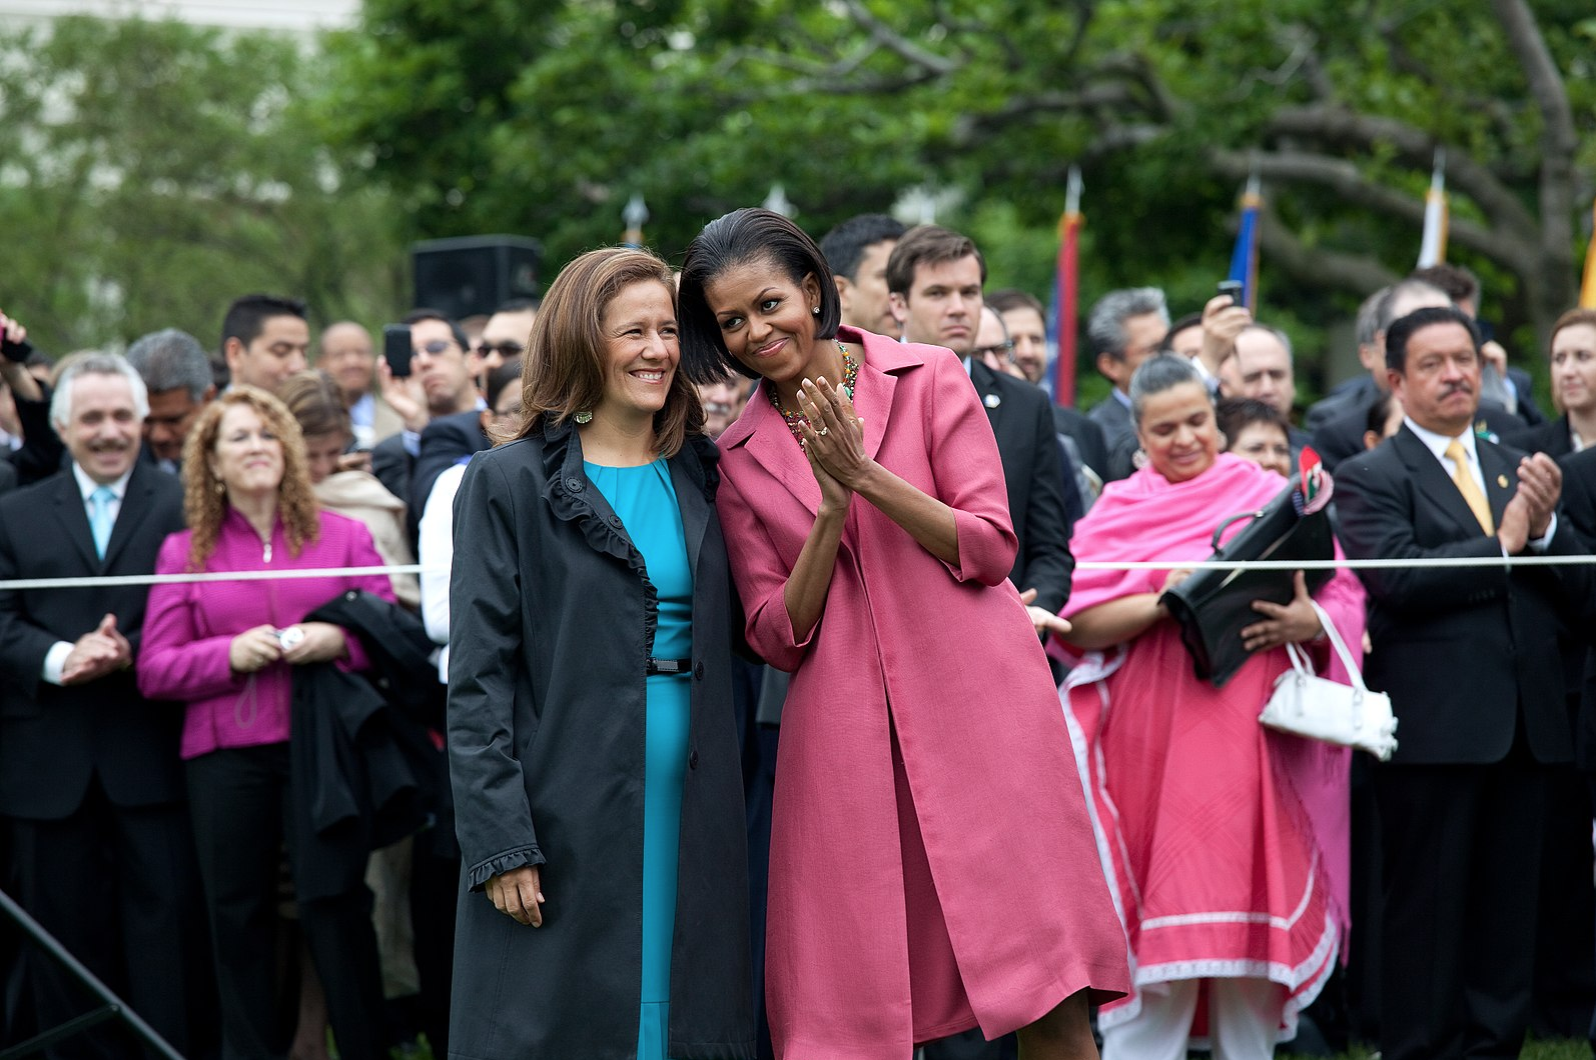 First Lady Michelle Obama and First Lady Margarita Zavala watch the State Arrival ceremony on the South Lawn of the White House, May 19, 2010. Image credit: Wikicommons/Pete Souza